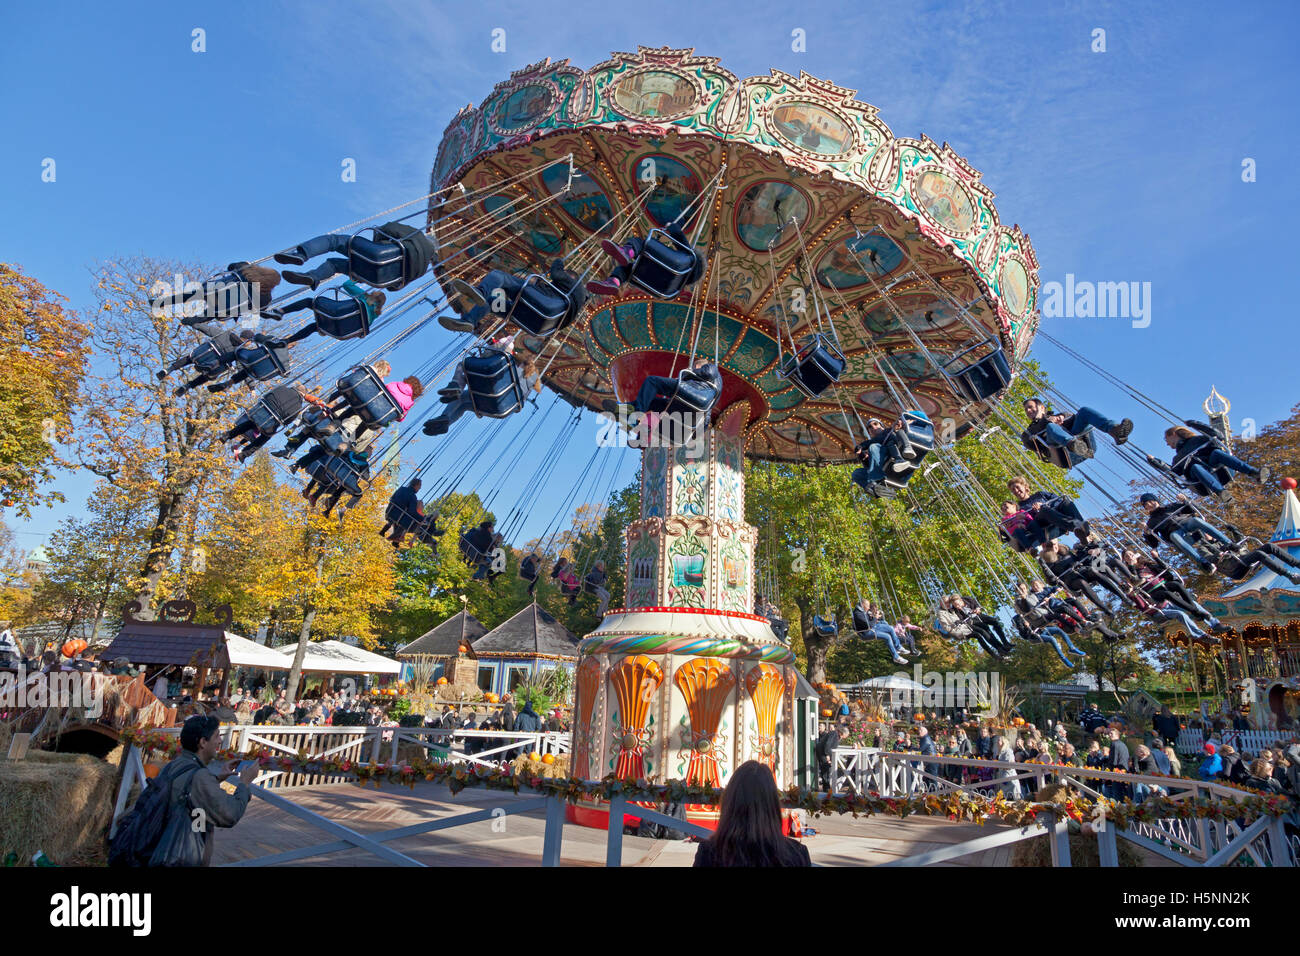 Halloween theme in the crowded Tivoli Gardens, Copenhagen, Denmark. The swing carousel or chairoplane ride on sunny afternoon in late October. Tivoli. Stock Photo